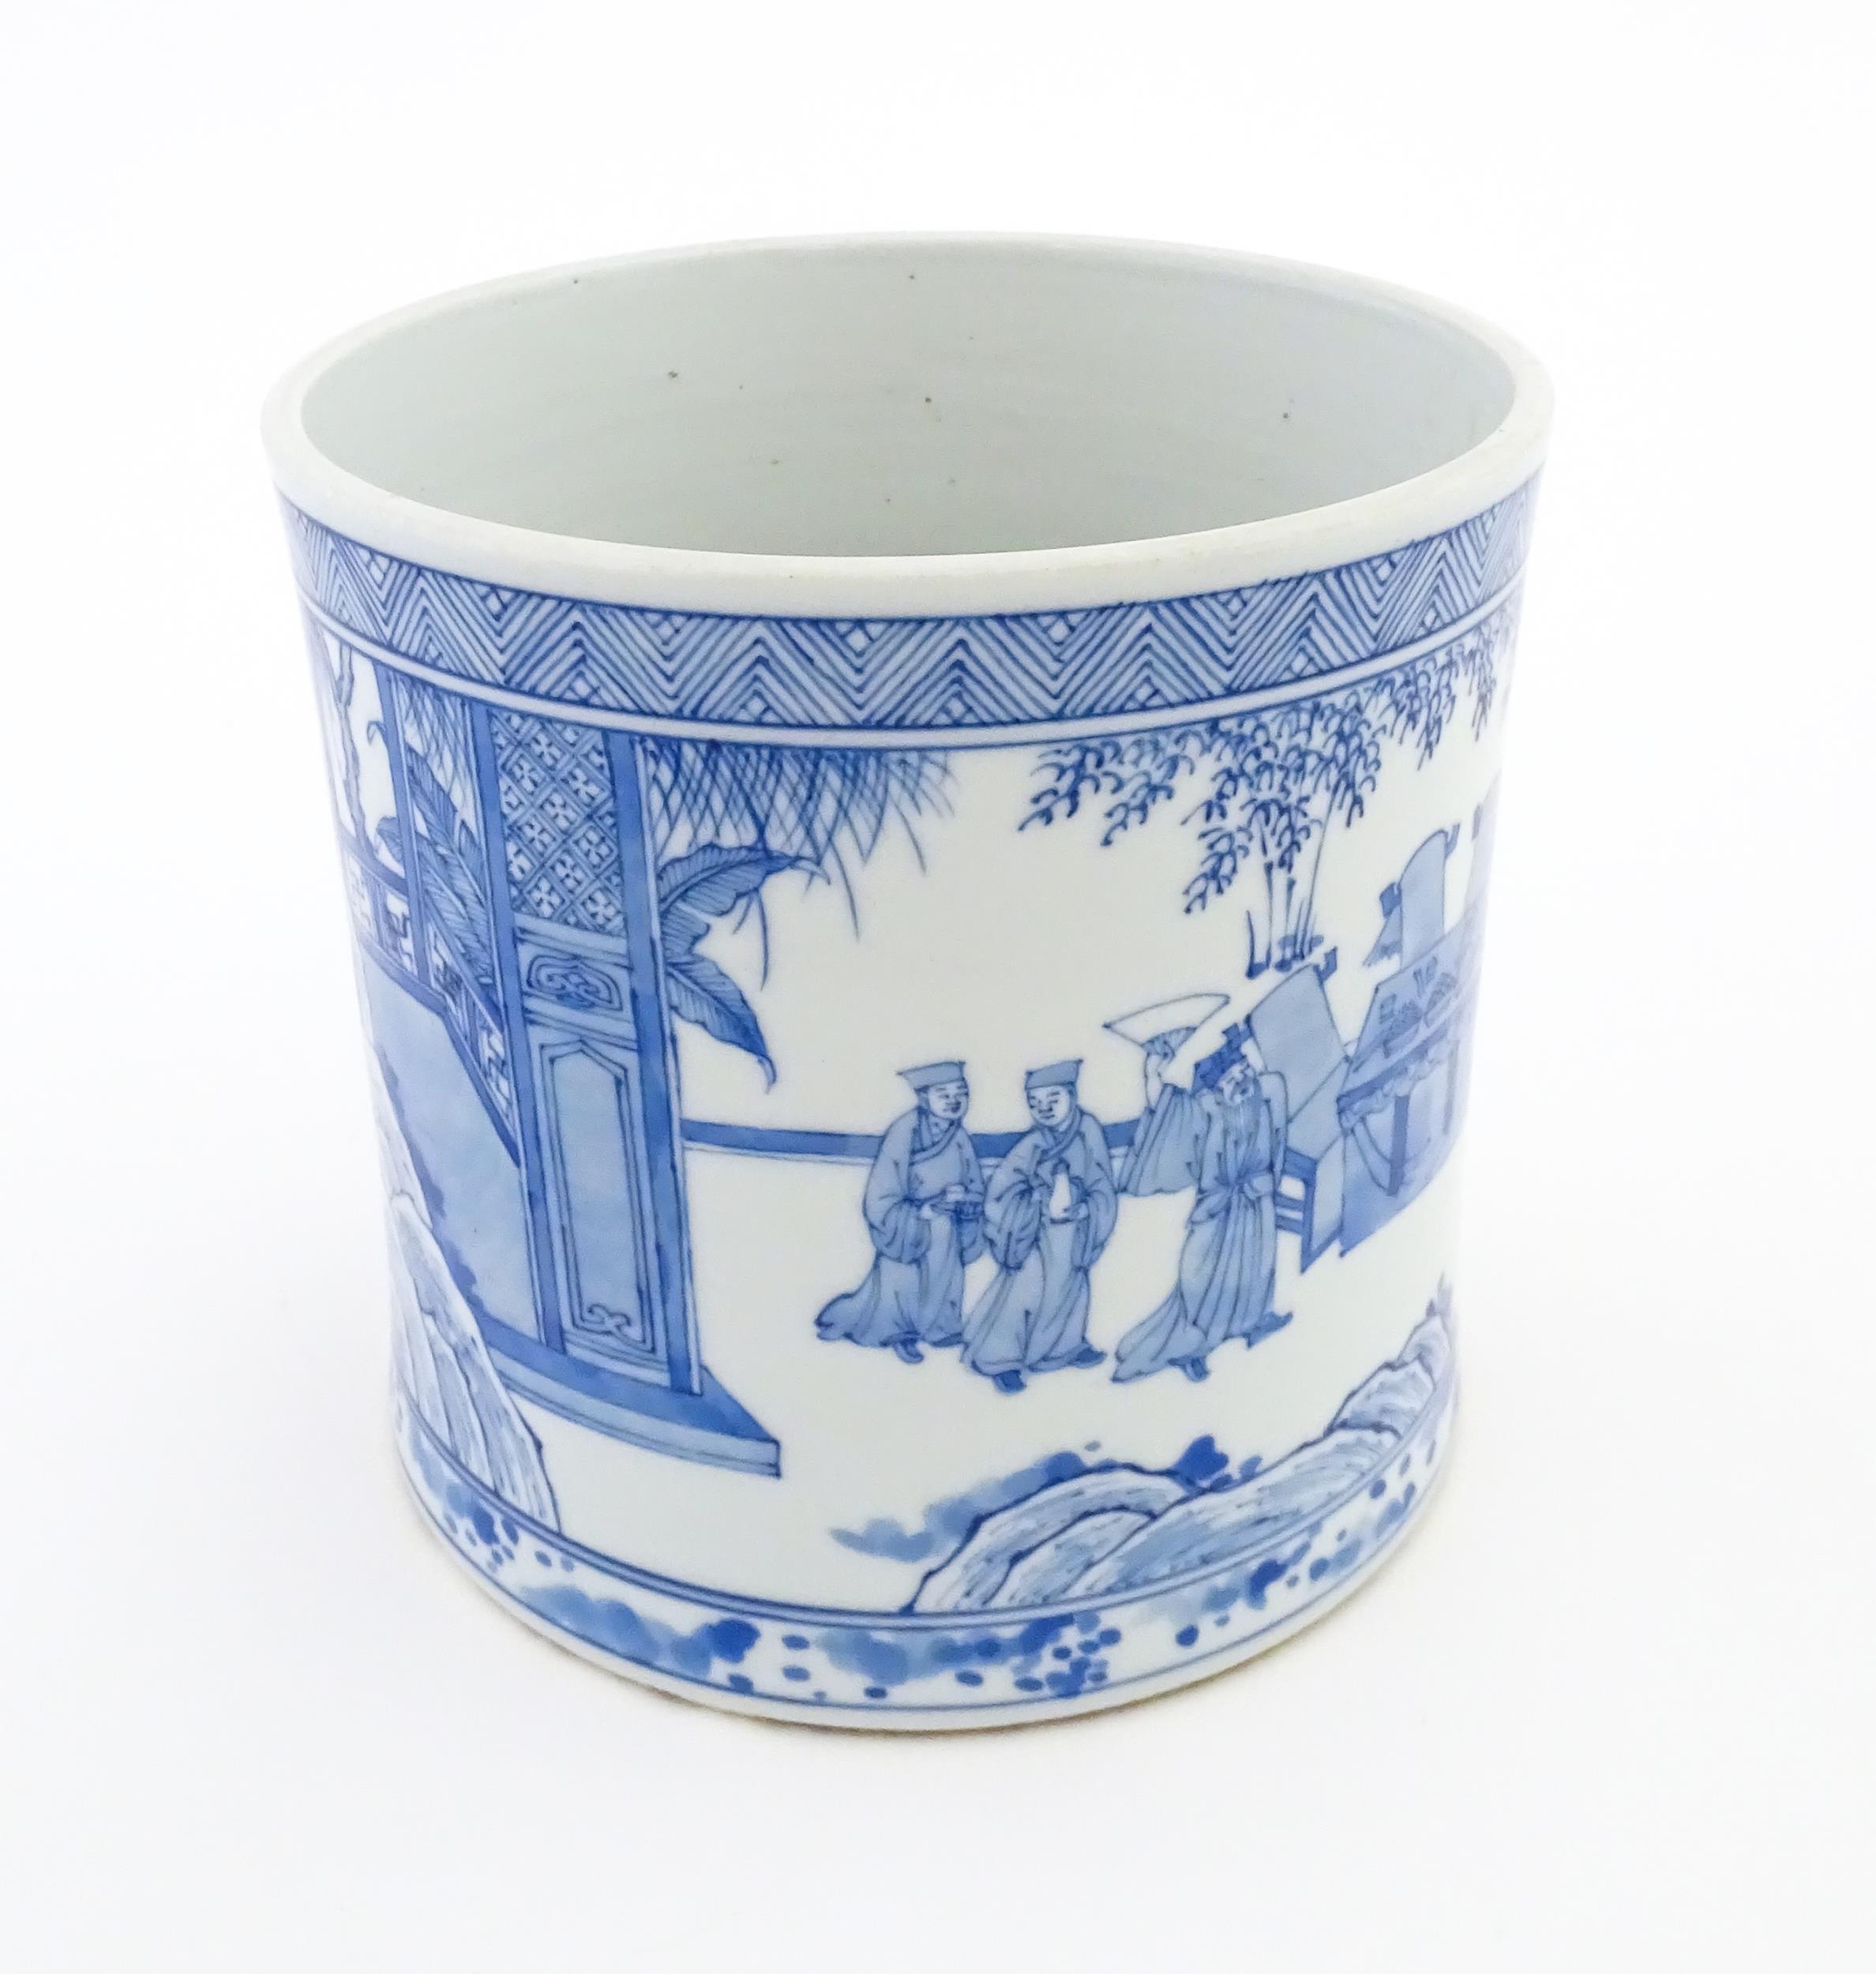 A Chinese blue and white vase / planter decorated with figures in a garden setting with a feast, and - Image 5 of 8